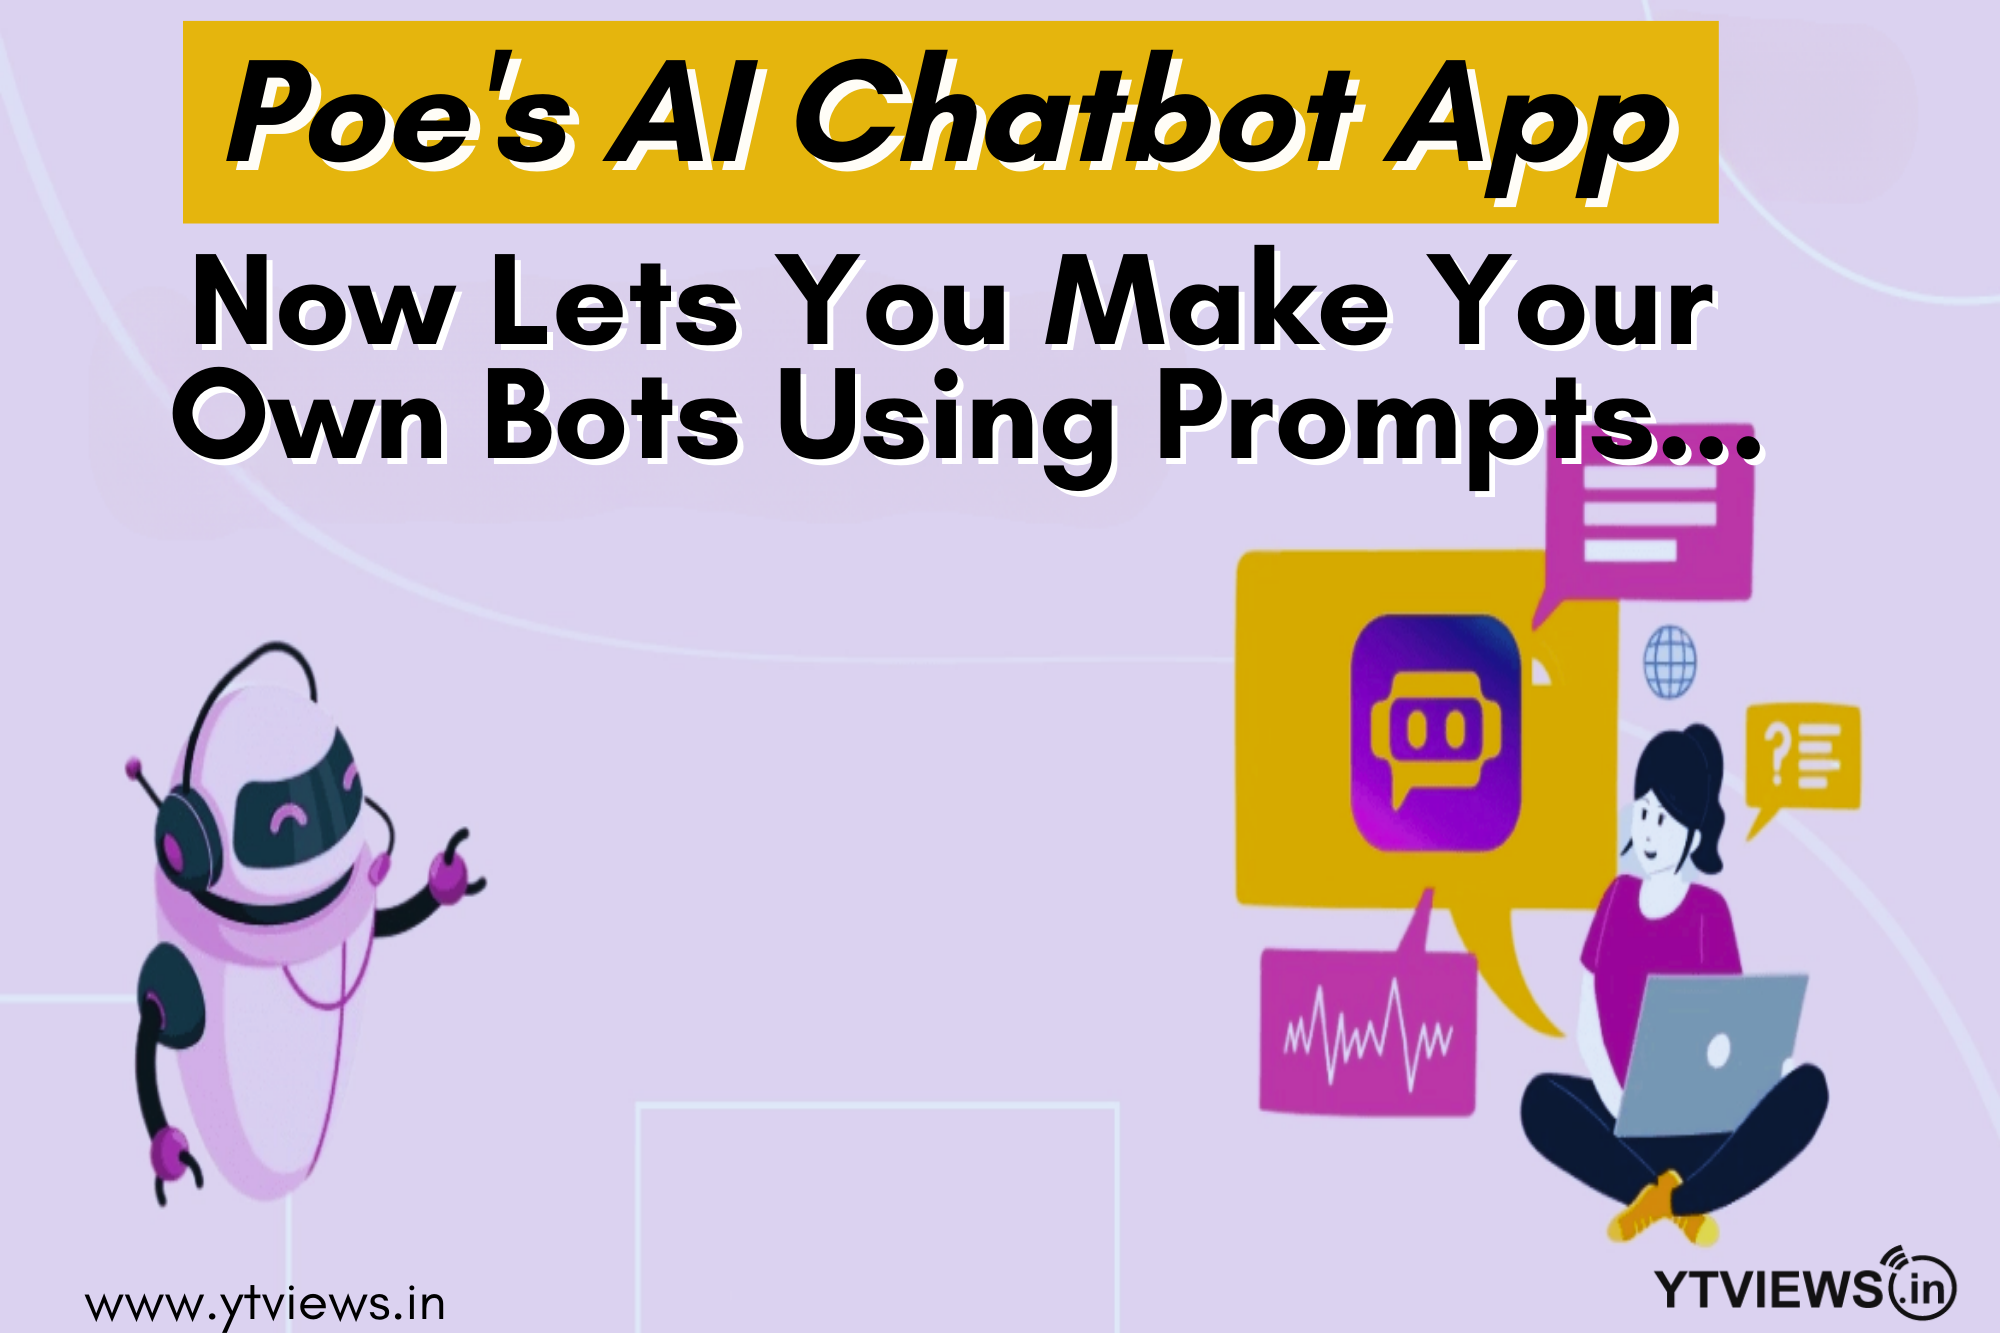 Poe’s AI chatbot app now lets you make your own bots using prompts